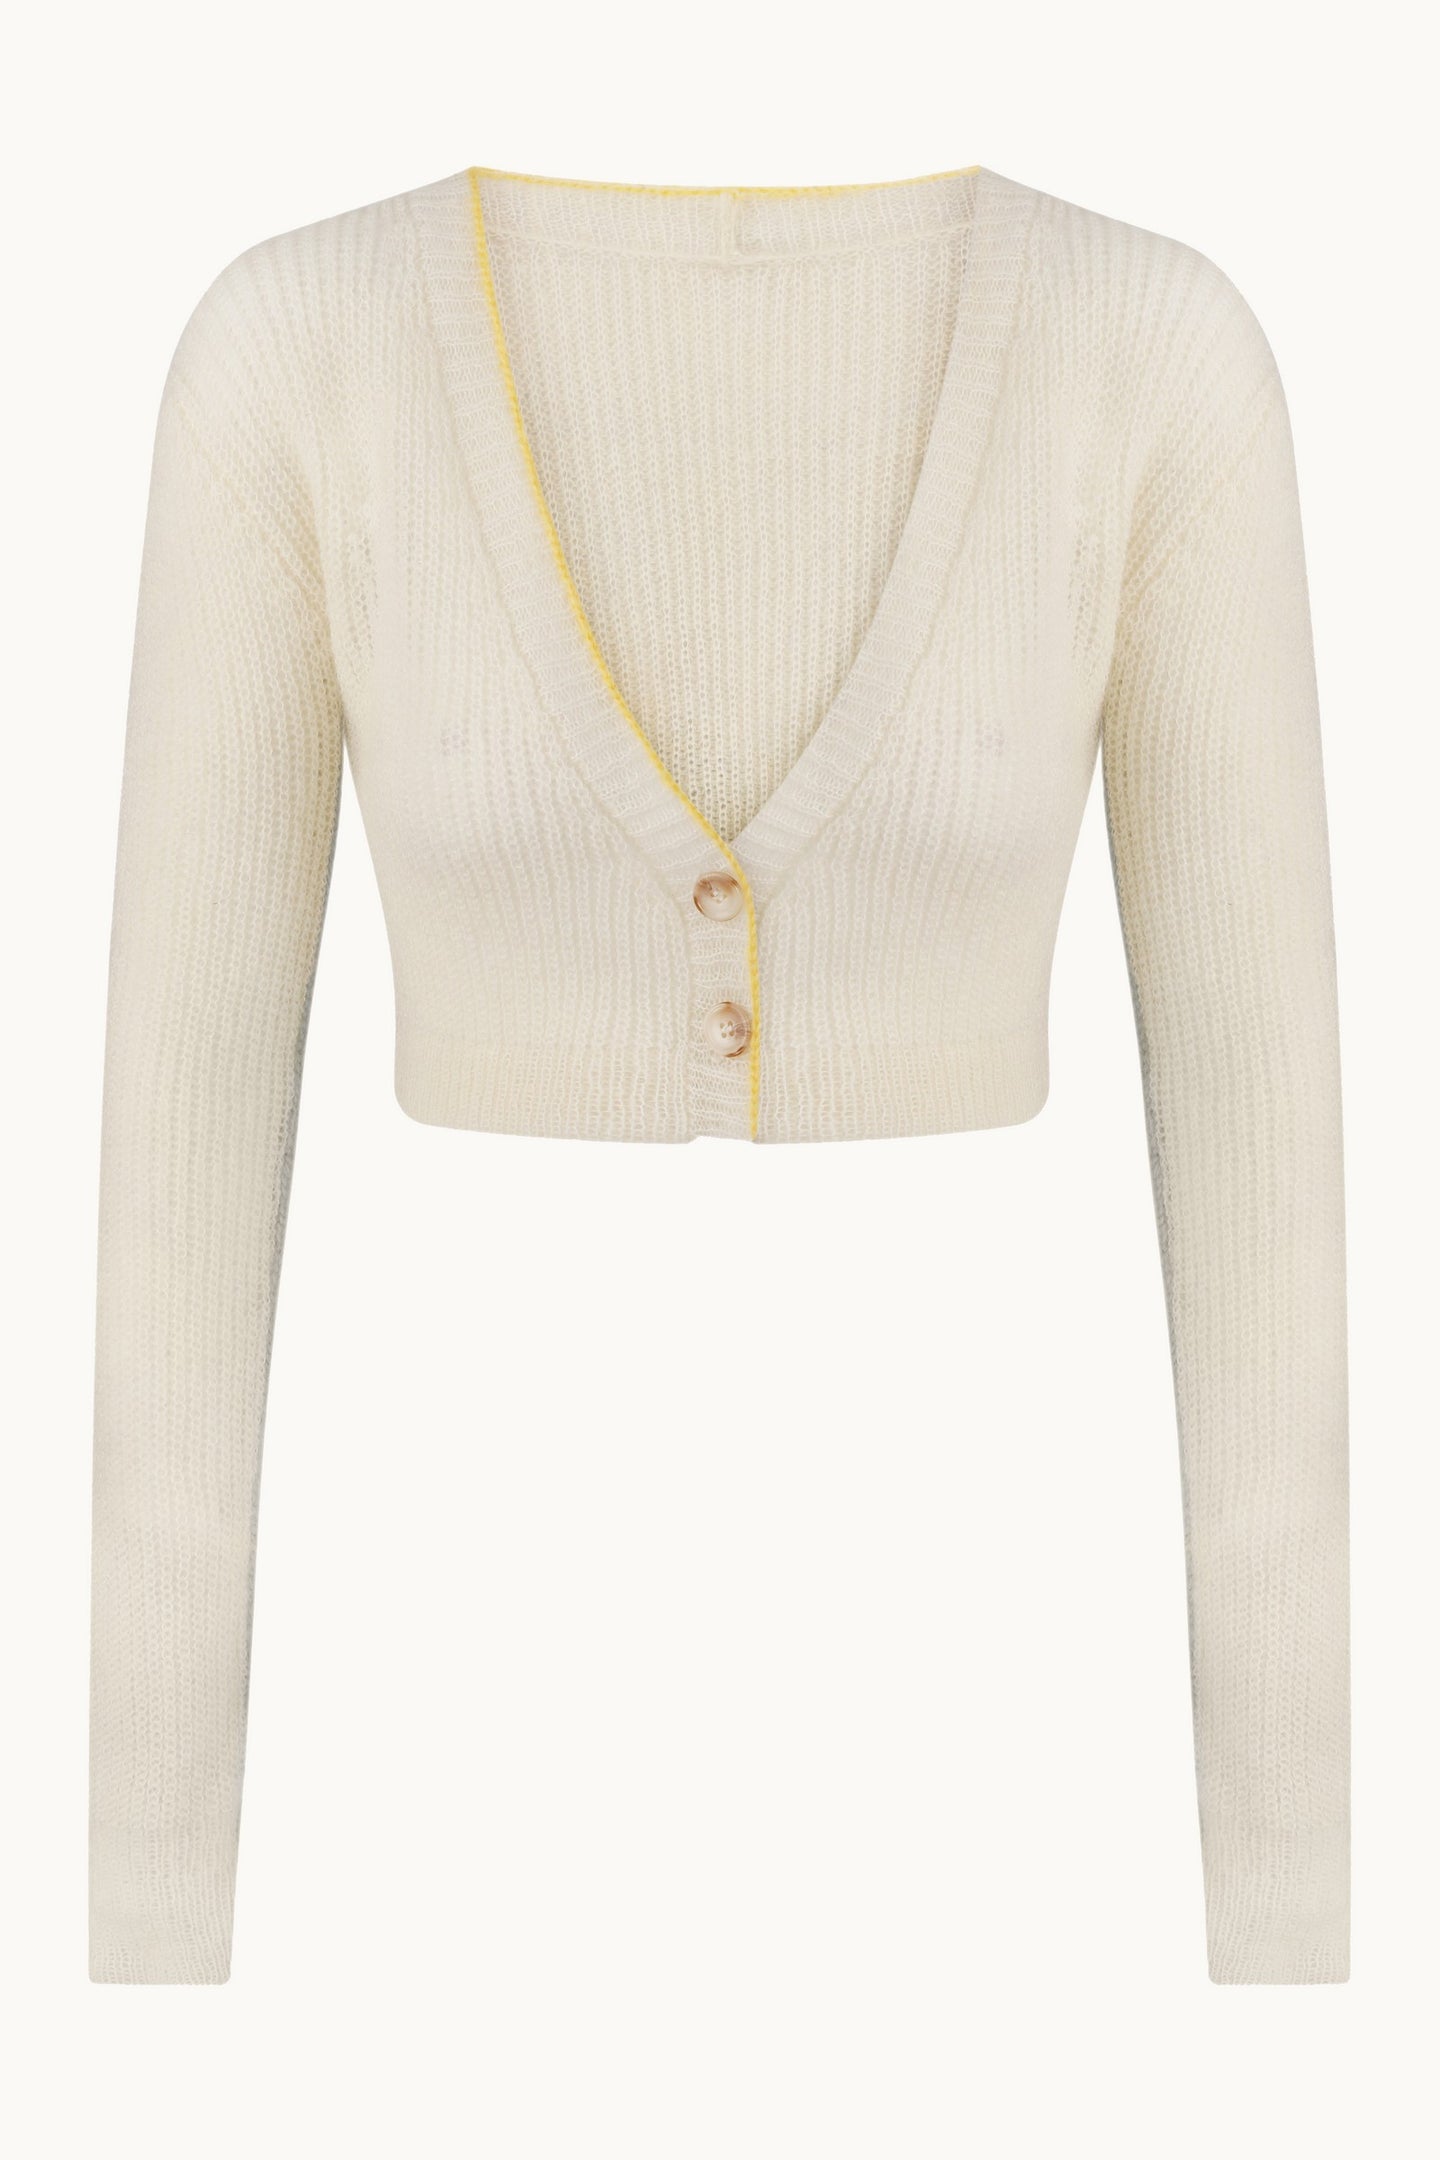 Lilou ivory cardigan front view